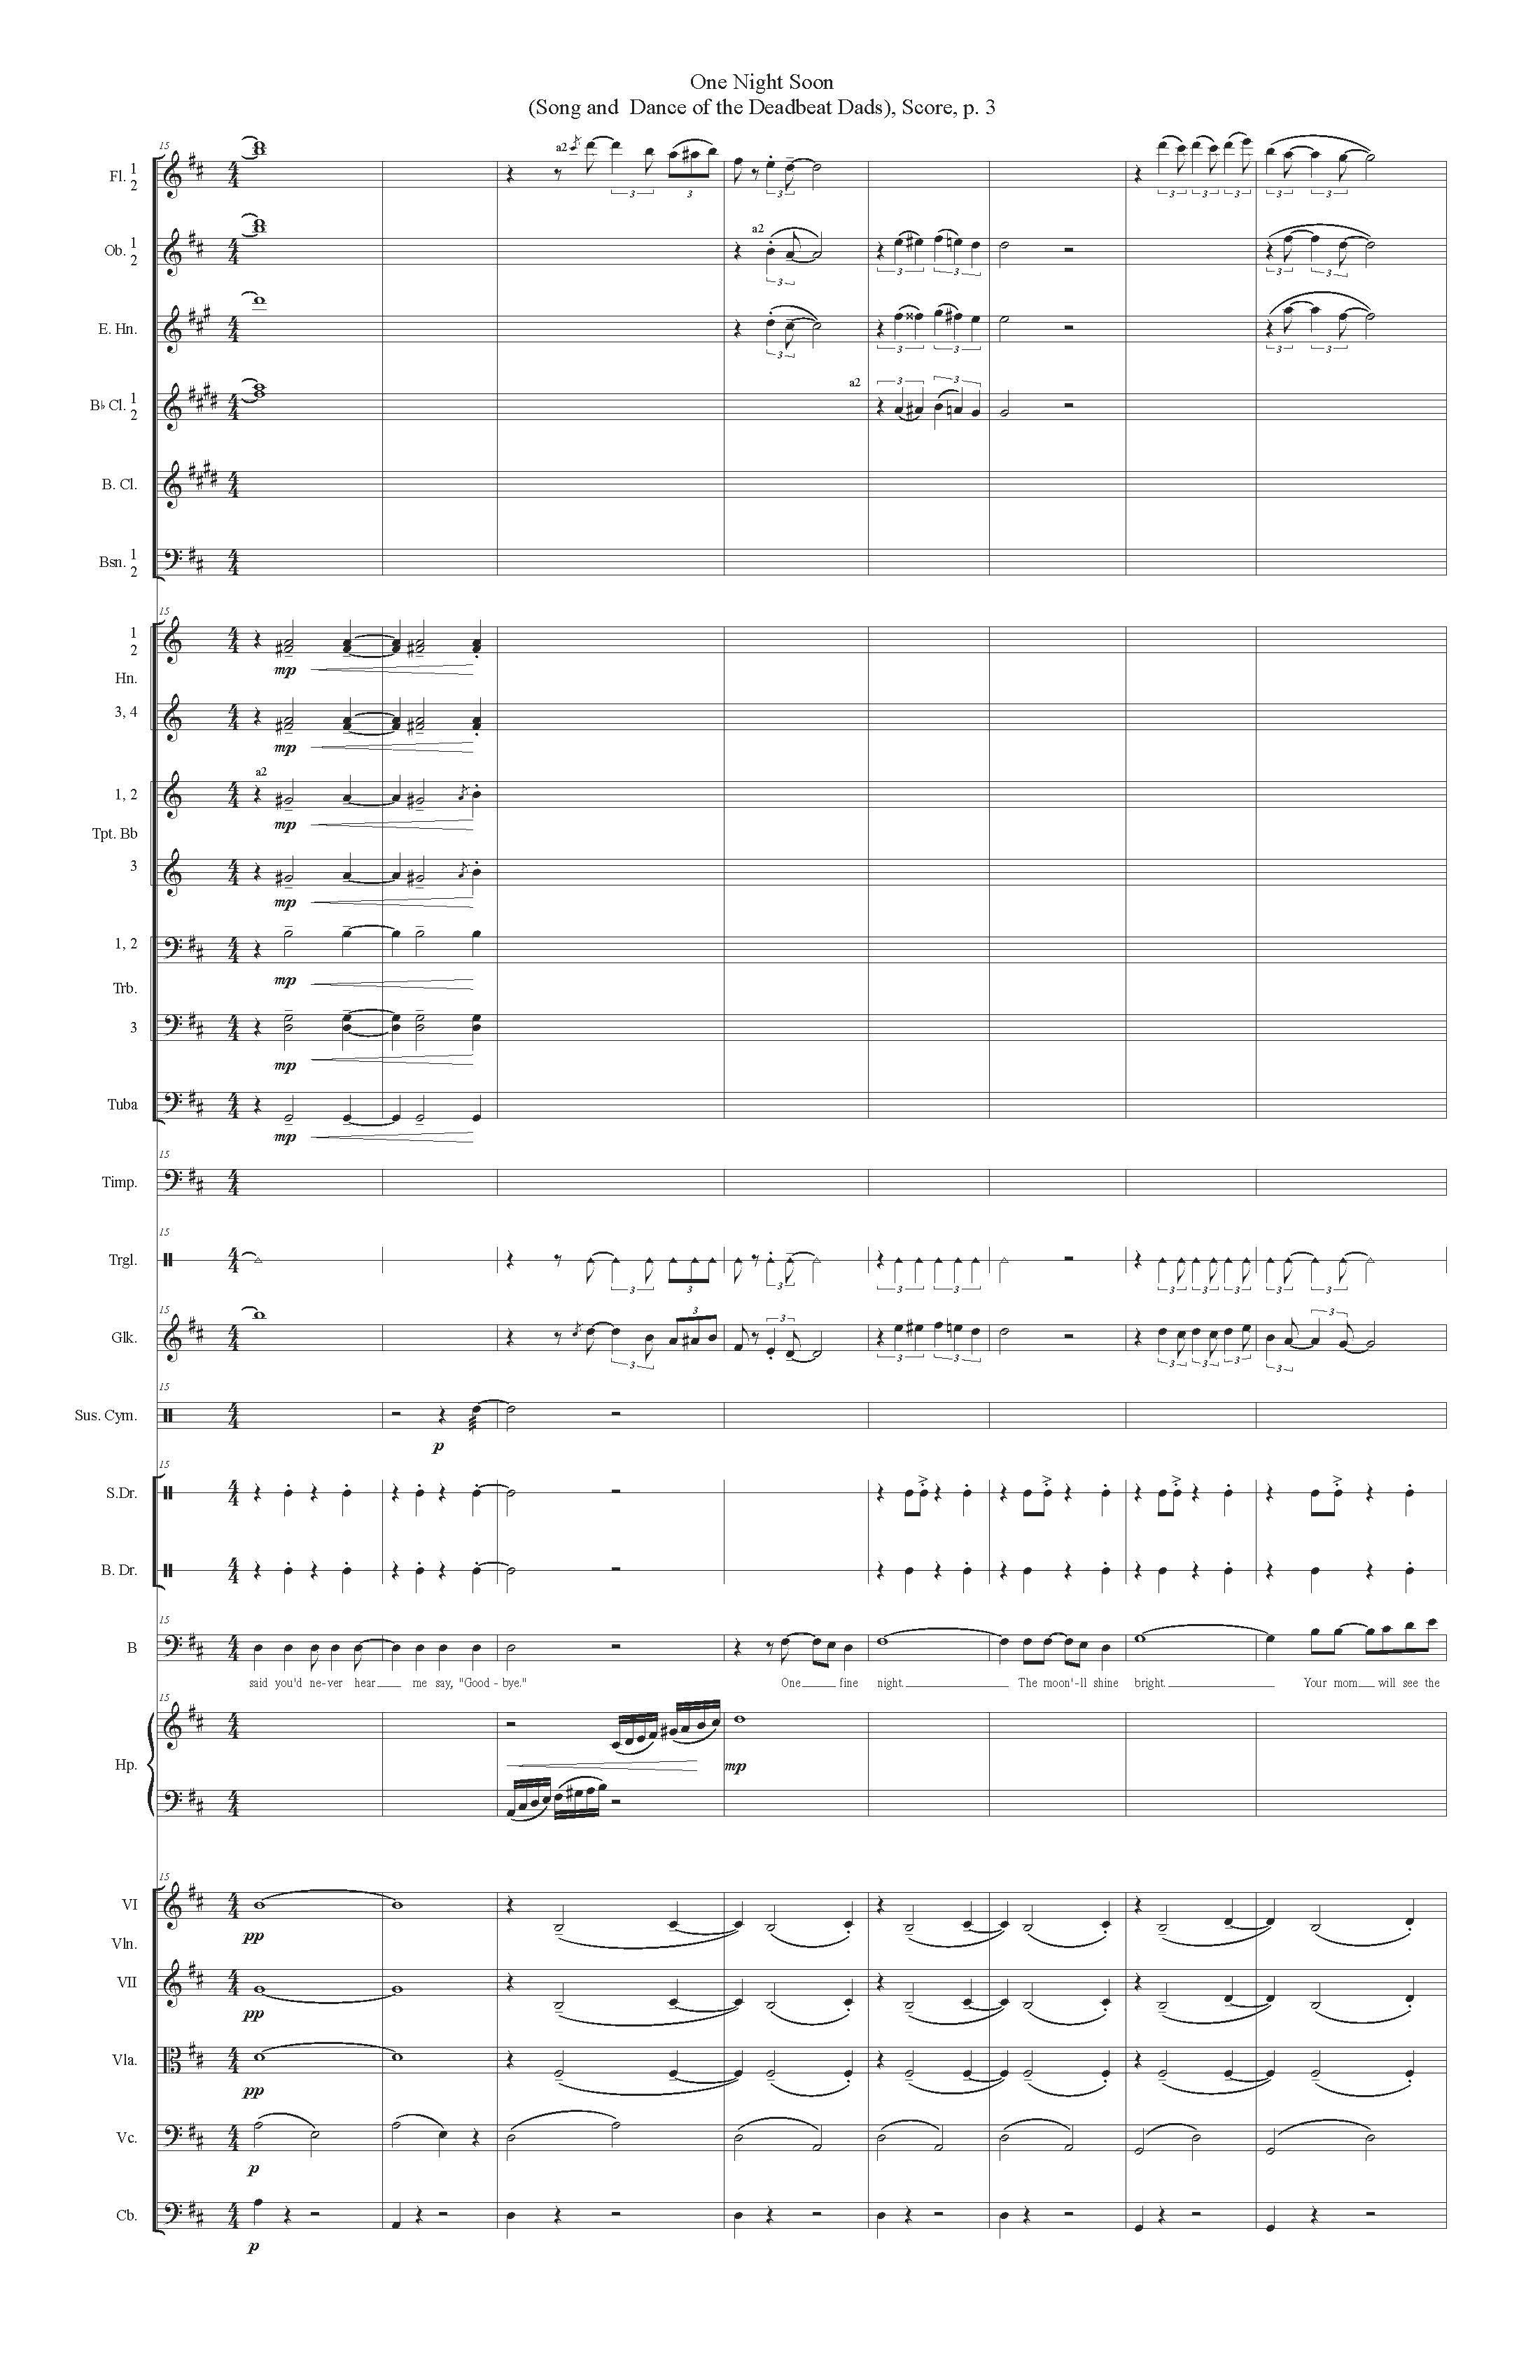 ONE NIGHT SOON ORCH - Score_Page_03.jpg